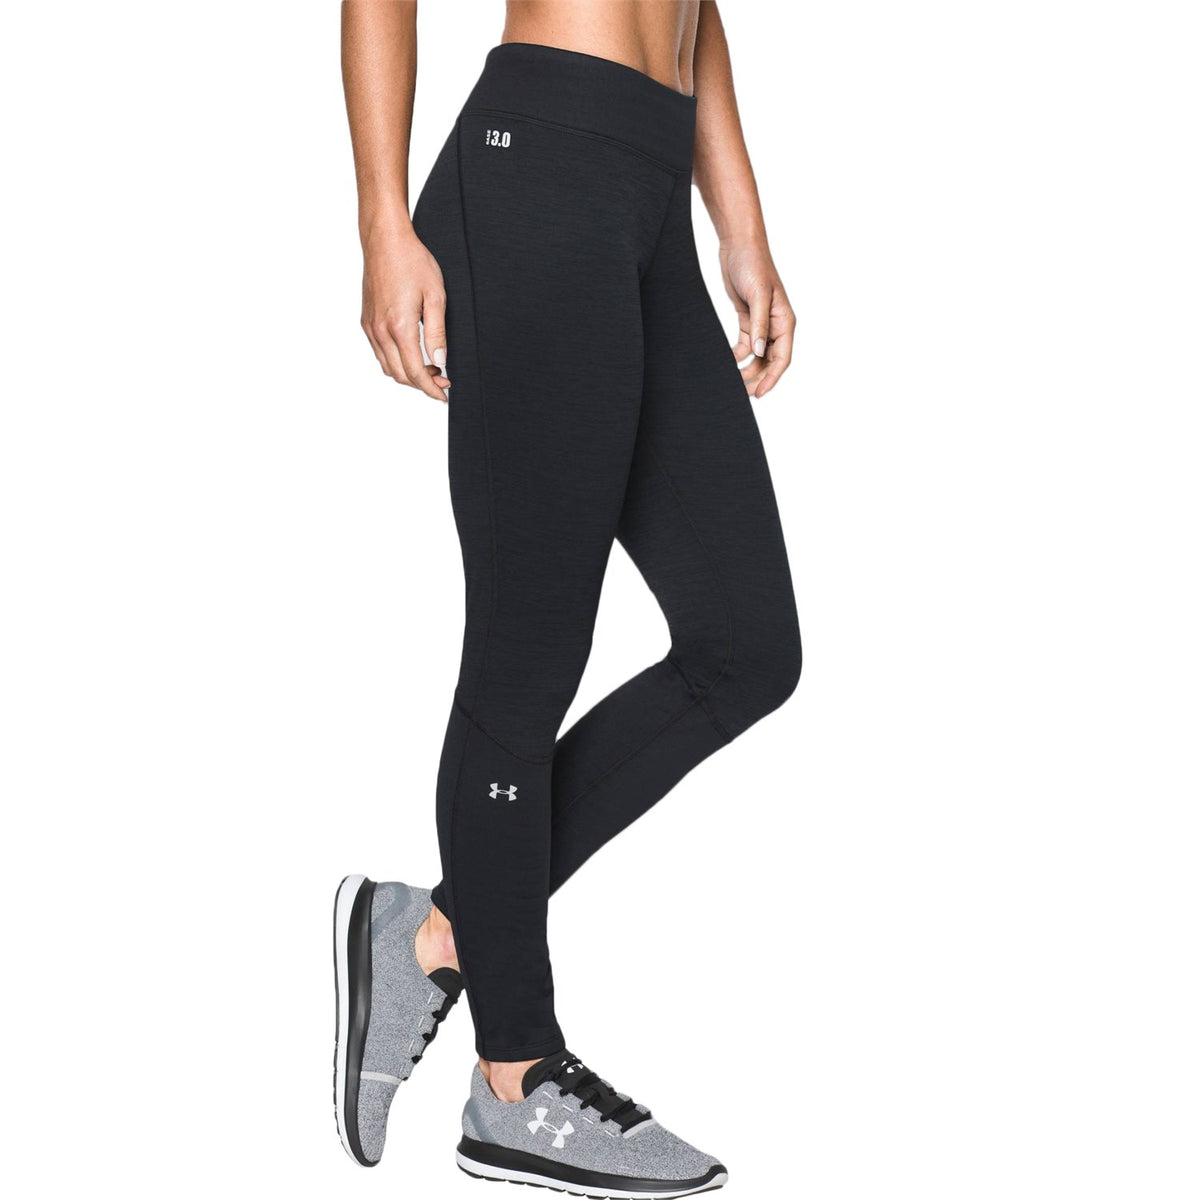 Under Armour Base layer - black 